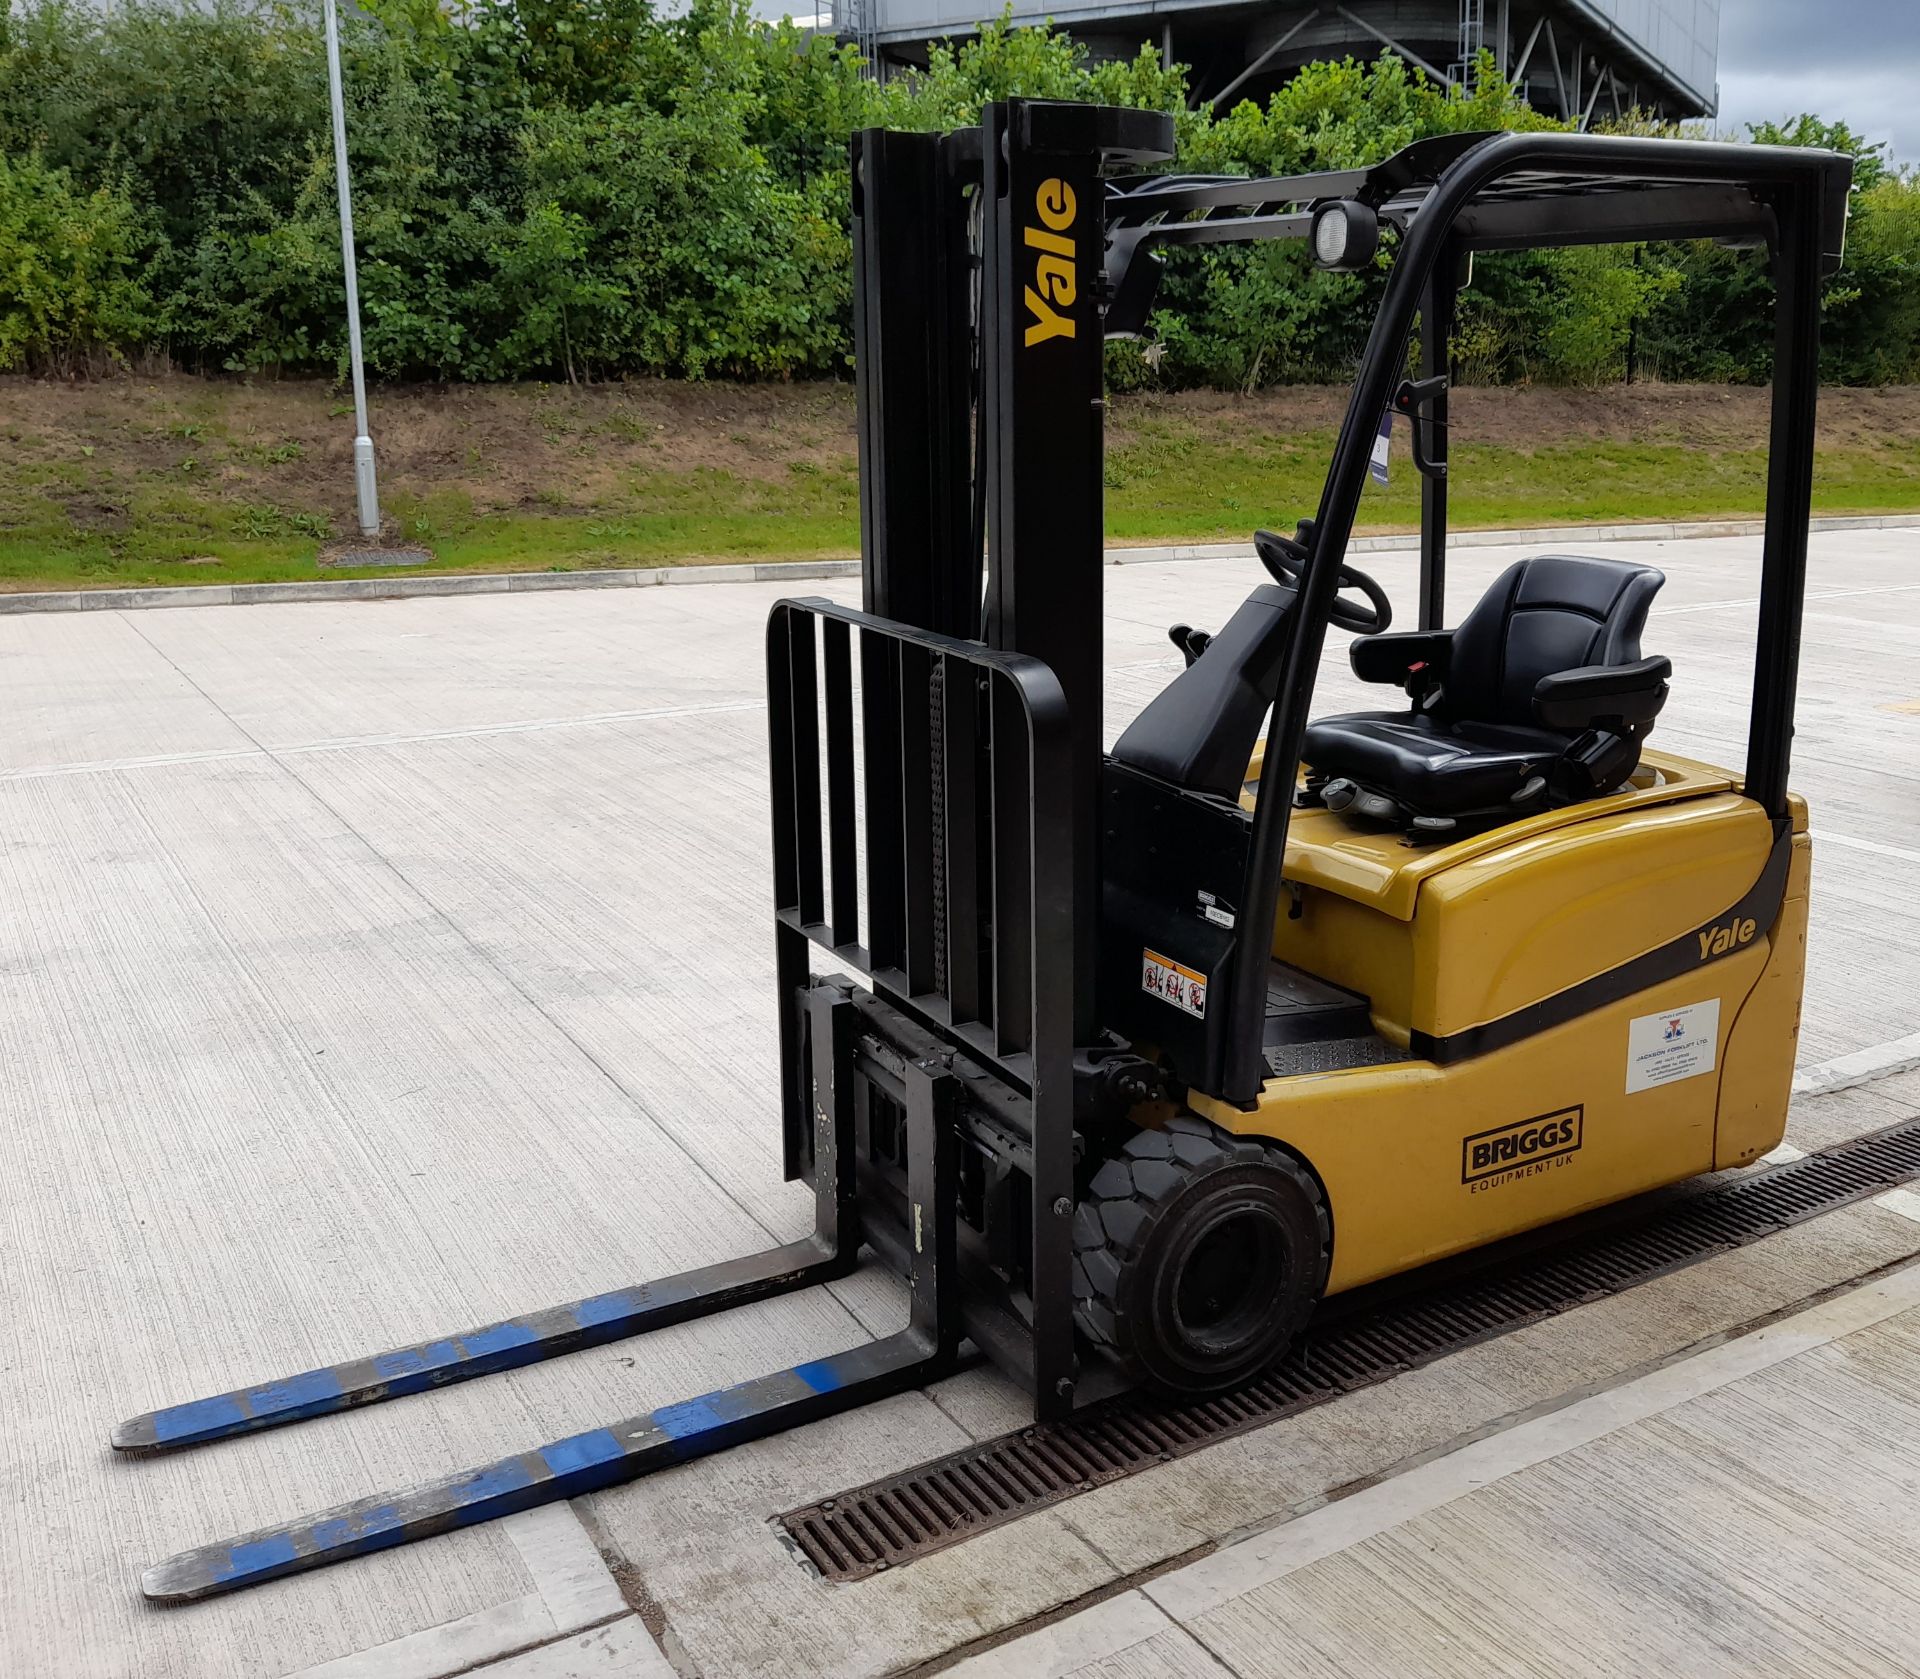 Yale ERP18VT MWBF2080 1.8tonne capacity Electric Forklift Truck, serial number G807B02410H (2010),